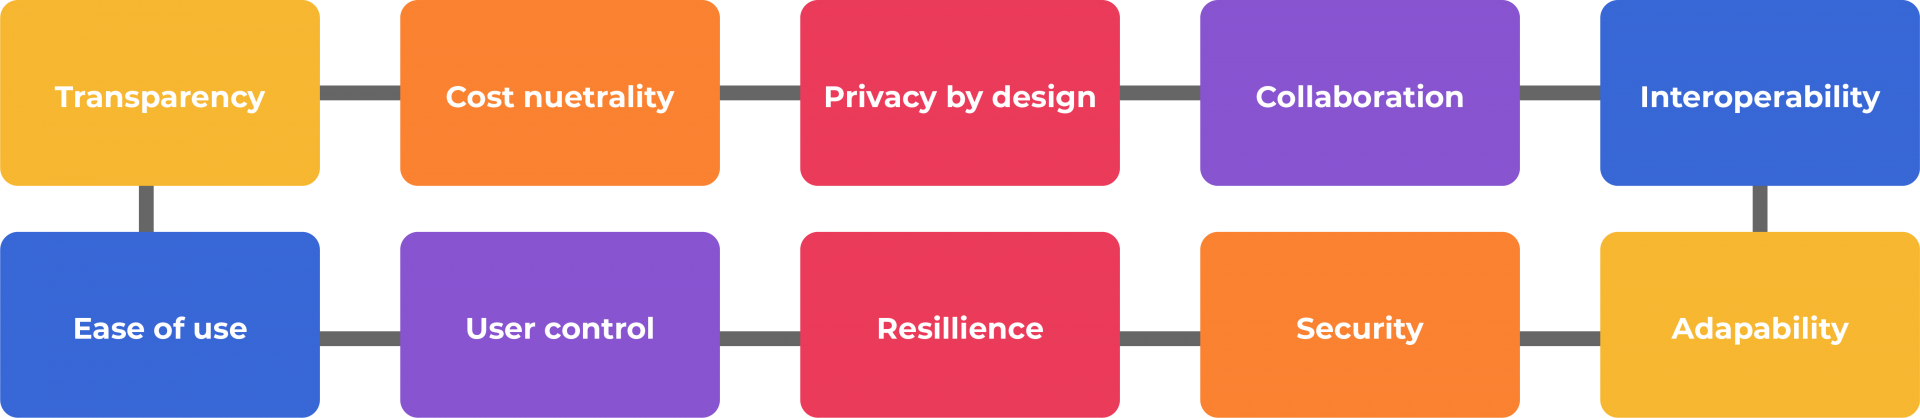  The architecture design principles for the Data Zoo identity ecosystem